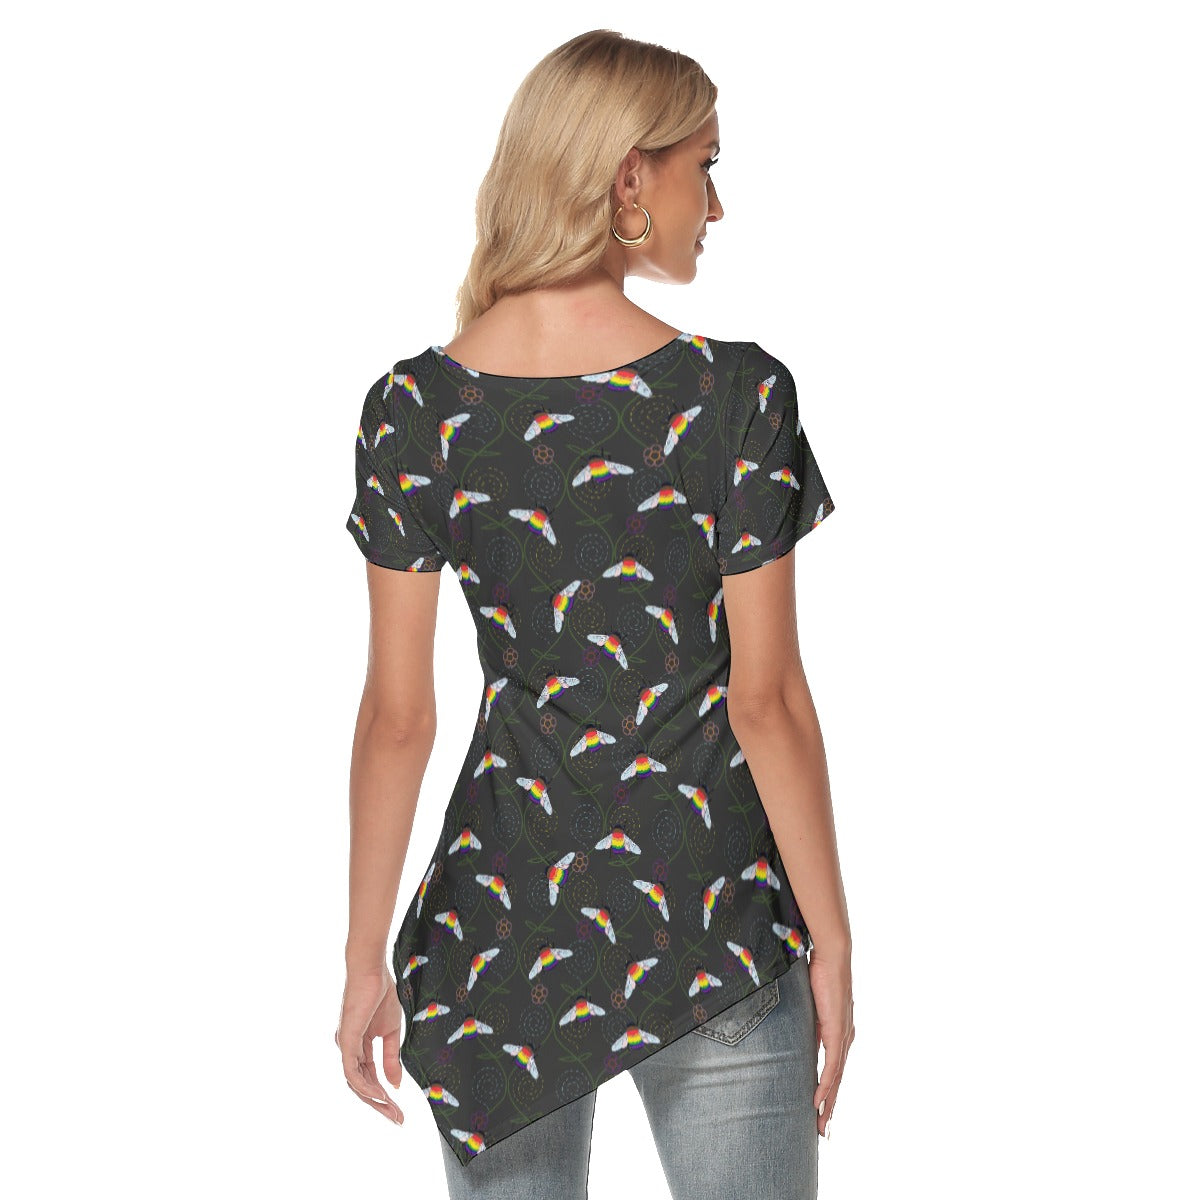 Bumblebee and Vine Patterned Asymmetrical Hem Short Sleeve T-shirt | Choose Your Colourway